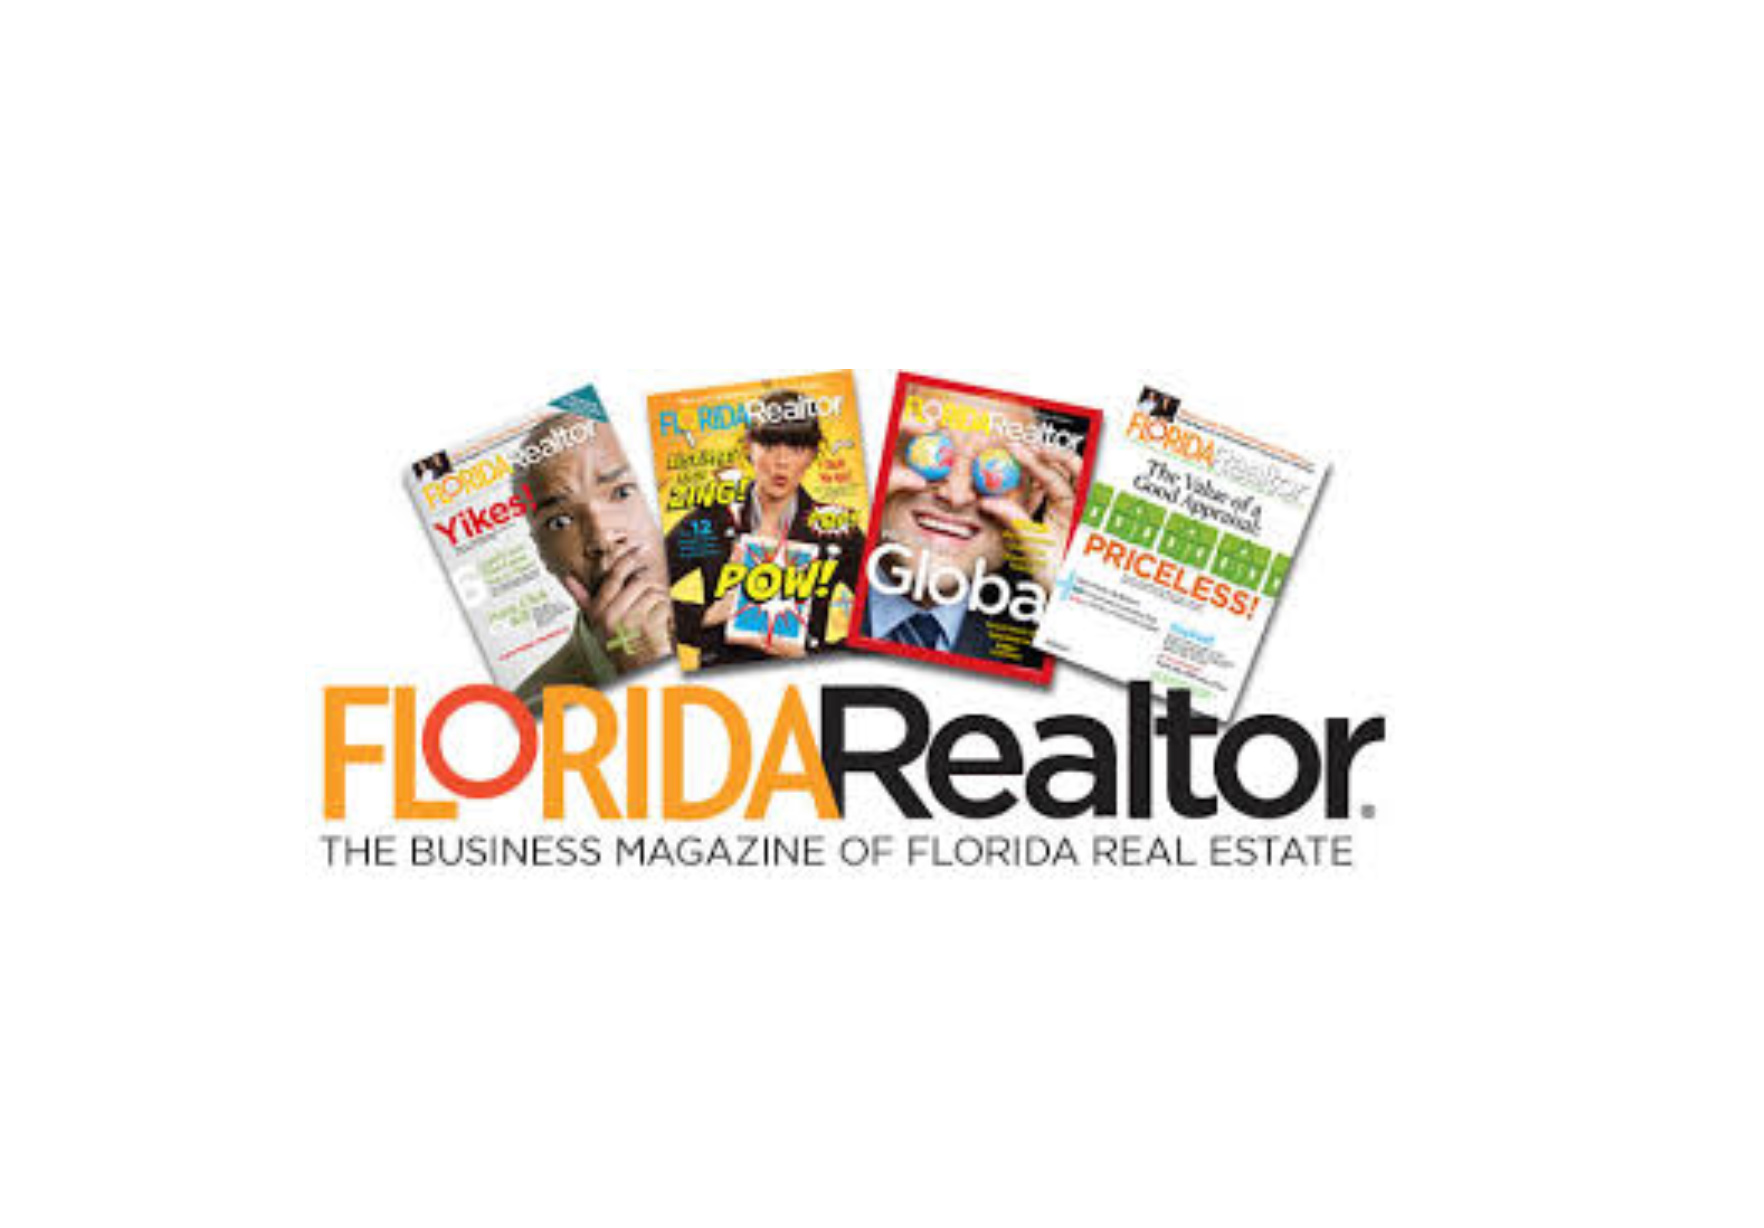 florida-realtor-magazine-marketing-thats-not-about-real-estate